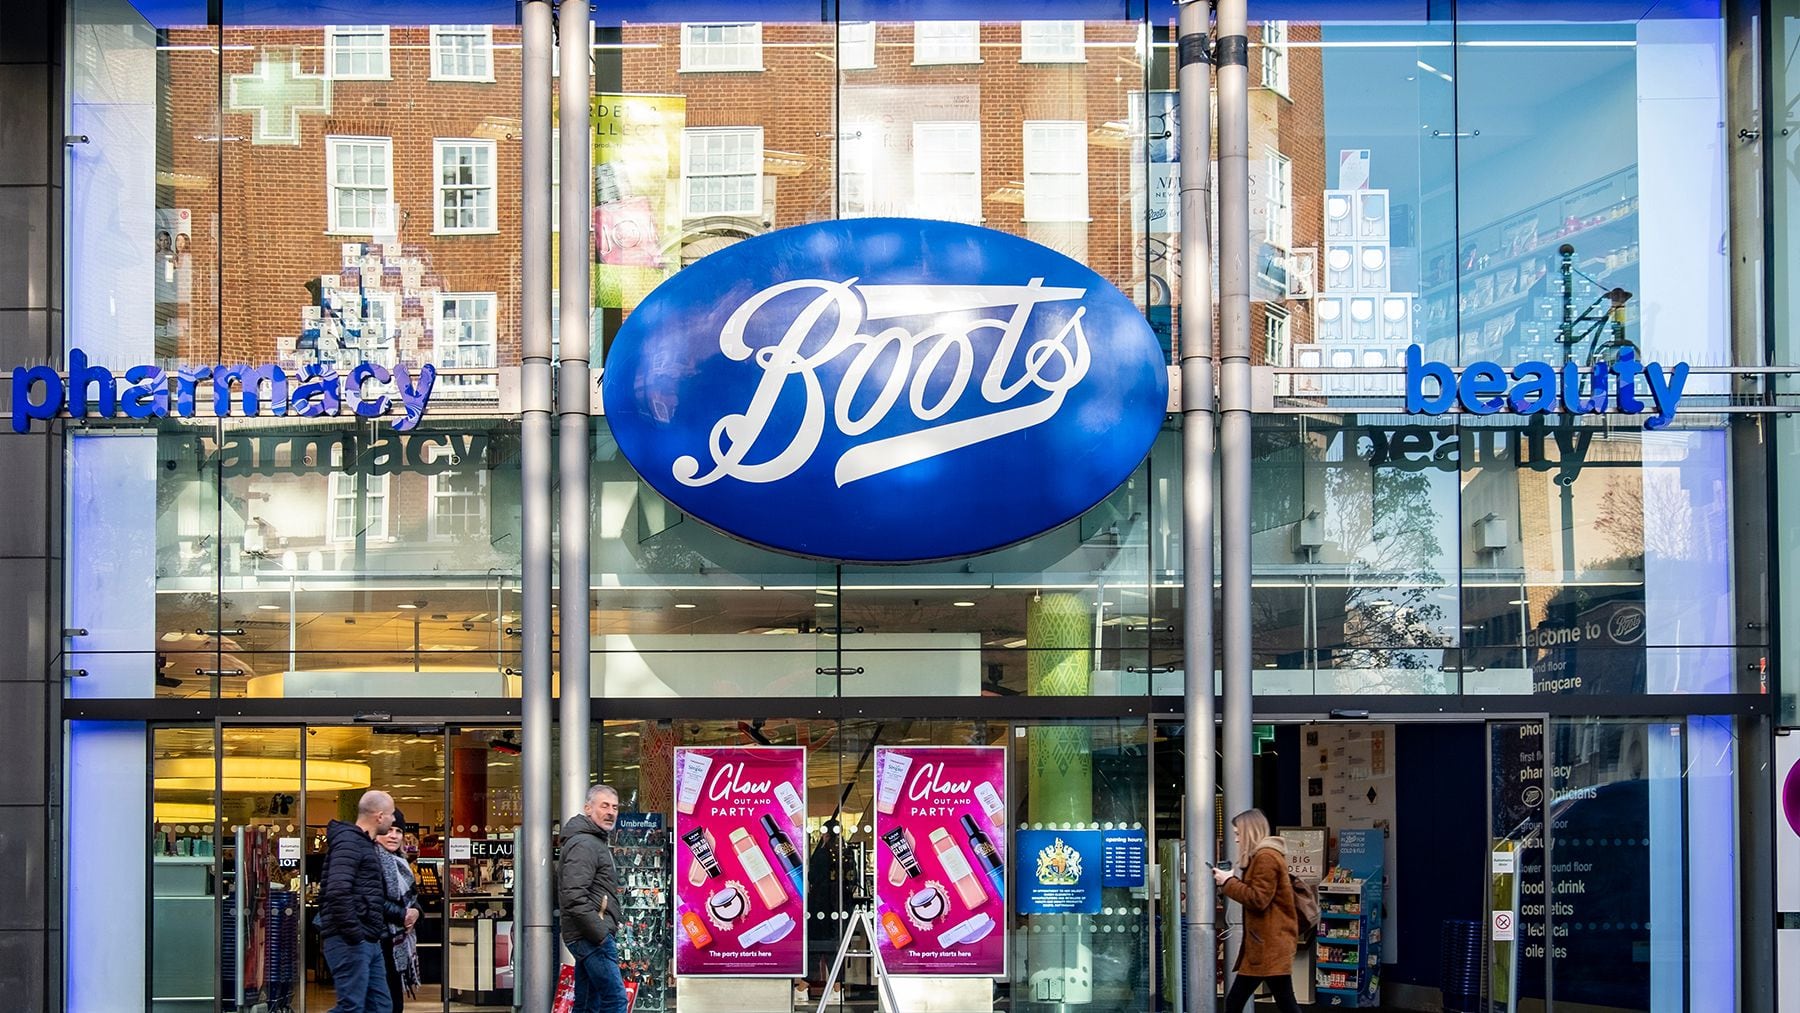 Boots Owner in Talks to Offload £7 Billion UK Pharmacy Chain